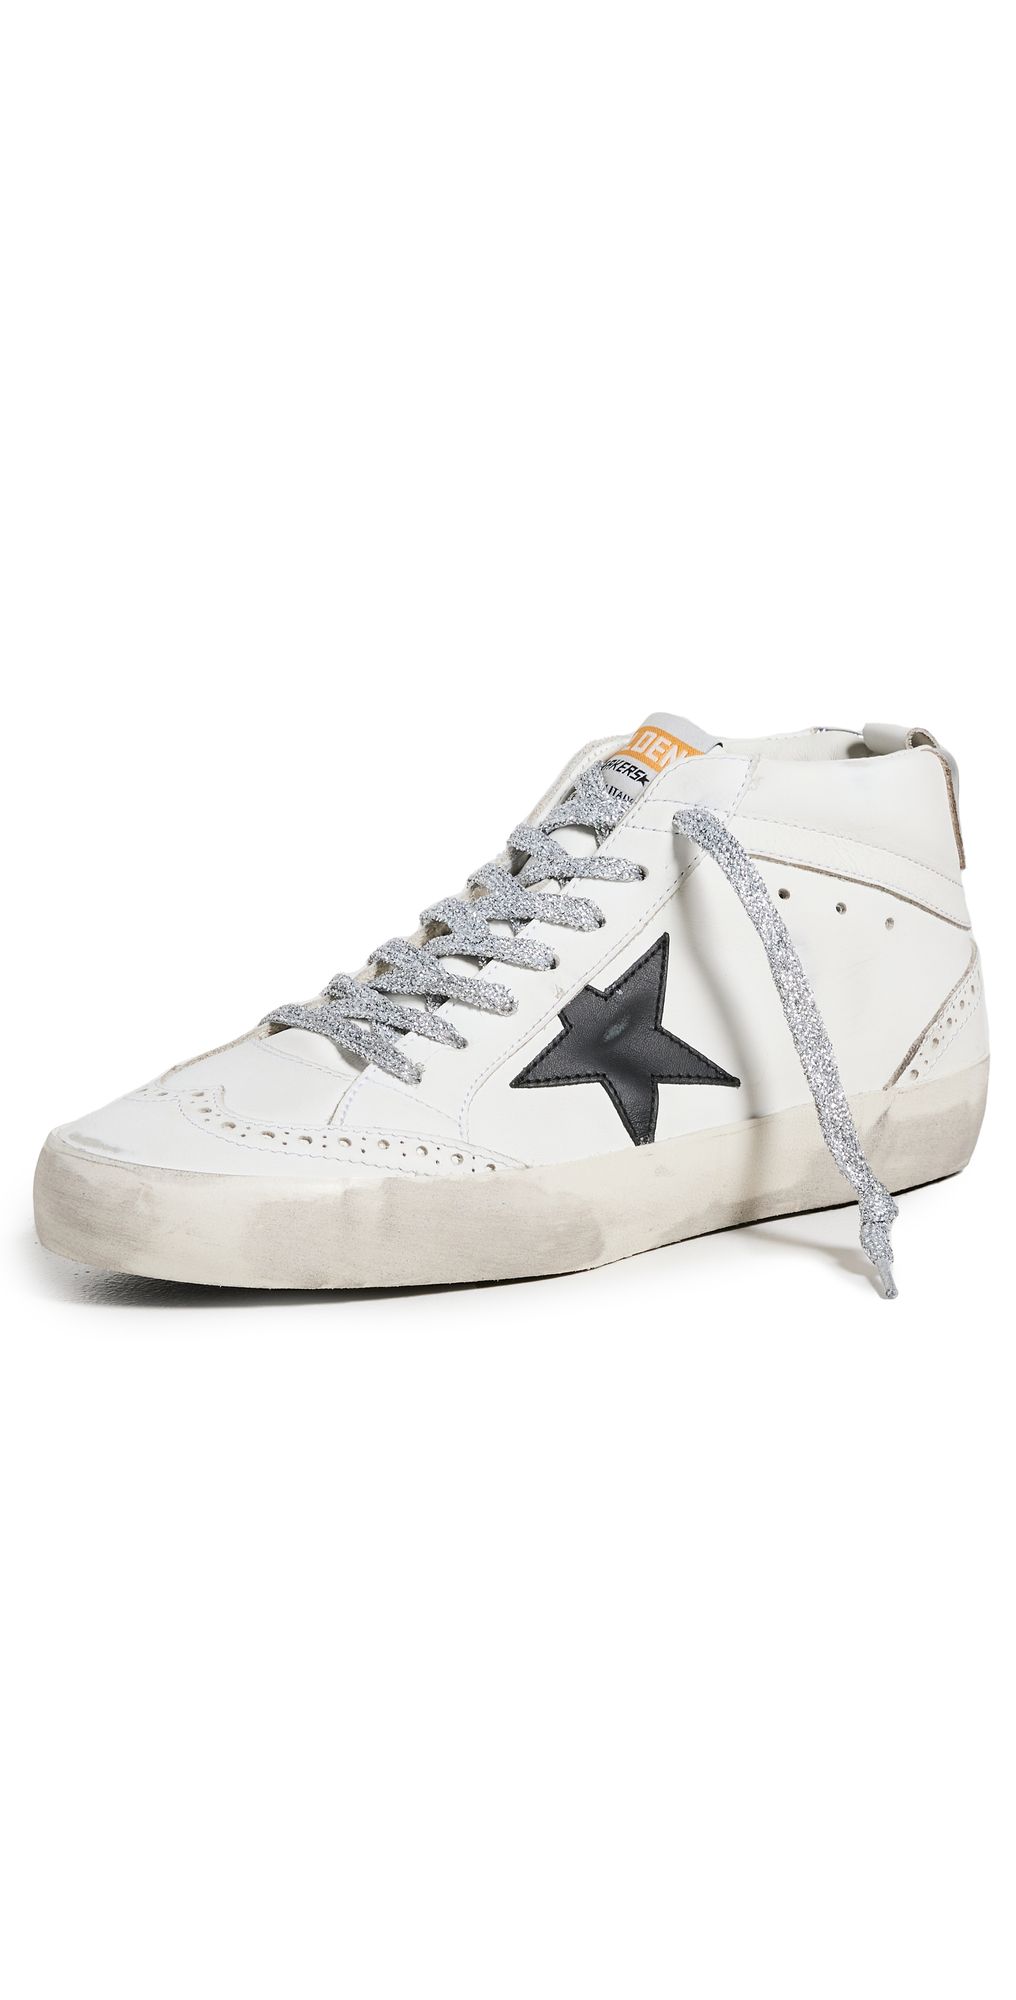 Golden Goose Mid Star Leather Upper Star and Wave Sneakers | Shopbop